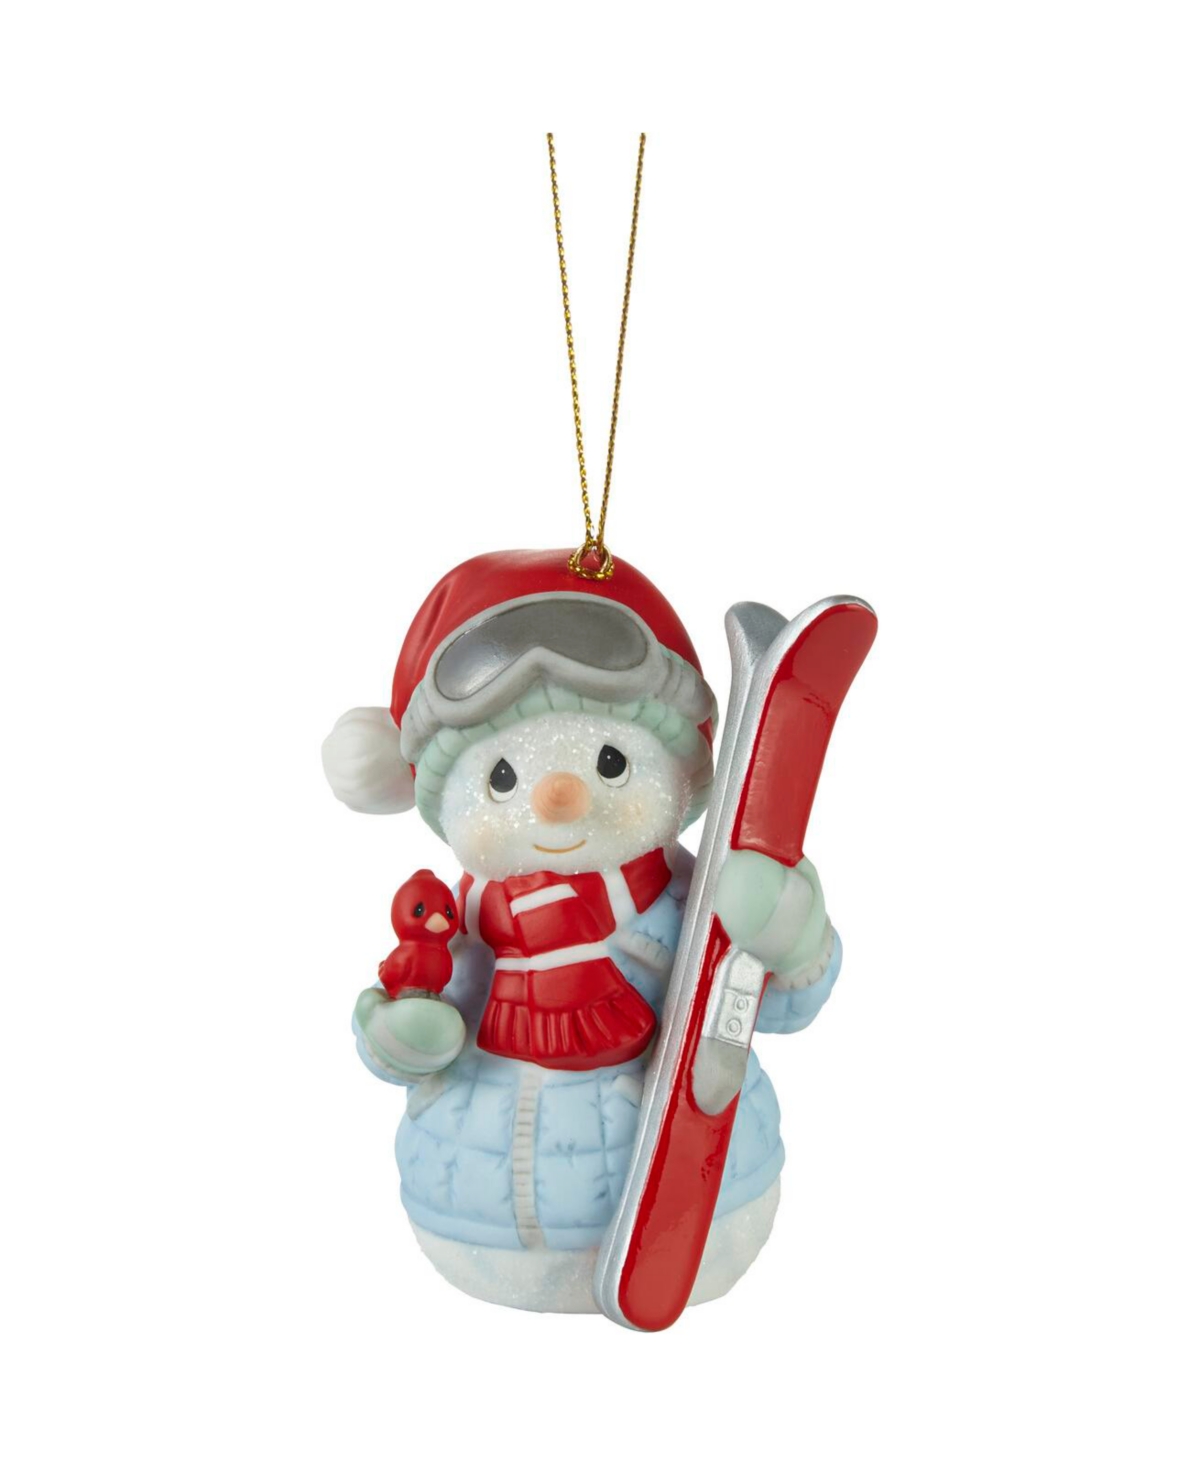 Precious Moments Tis The Ski-son To Be Jolly Annual Snowman Bisque Porcelain Ornament In Multicolored